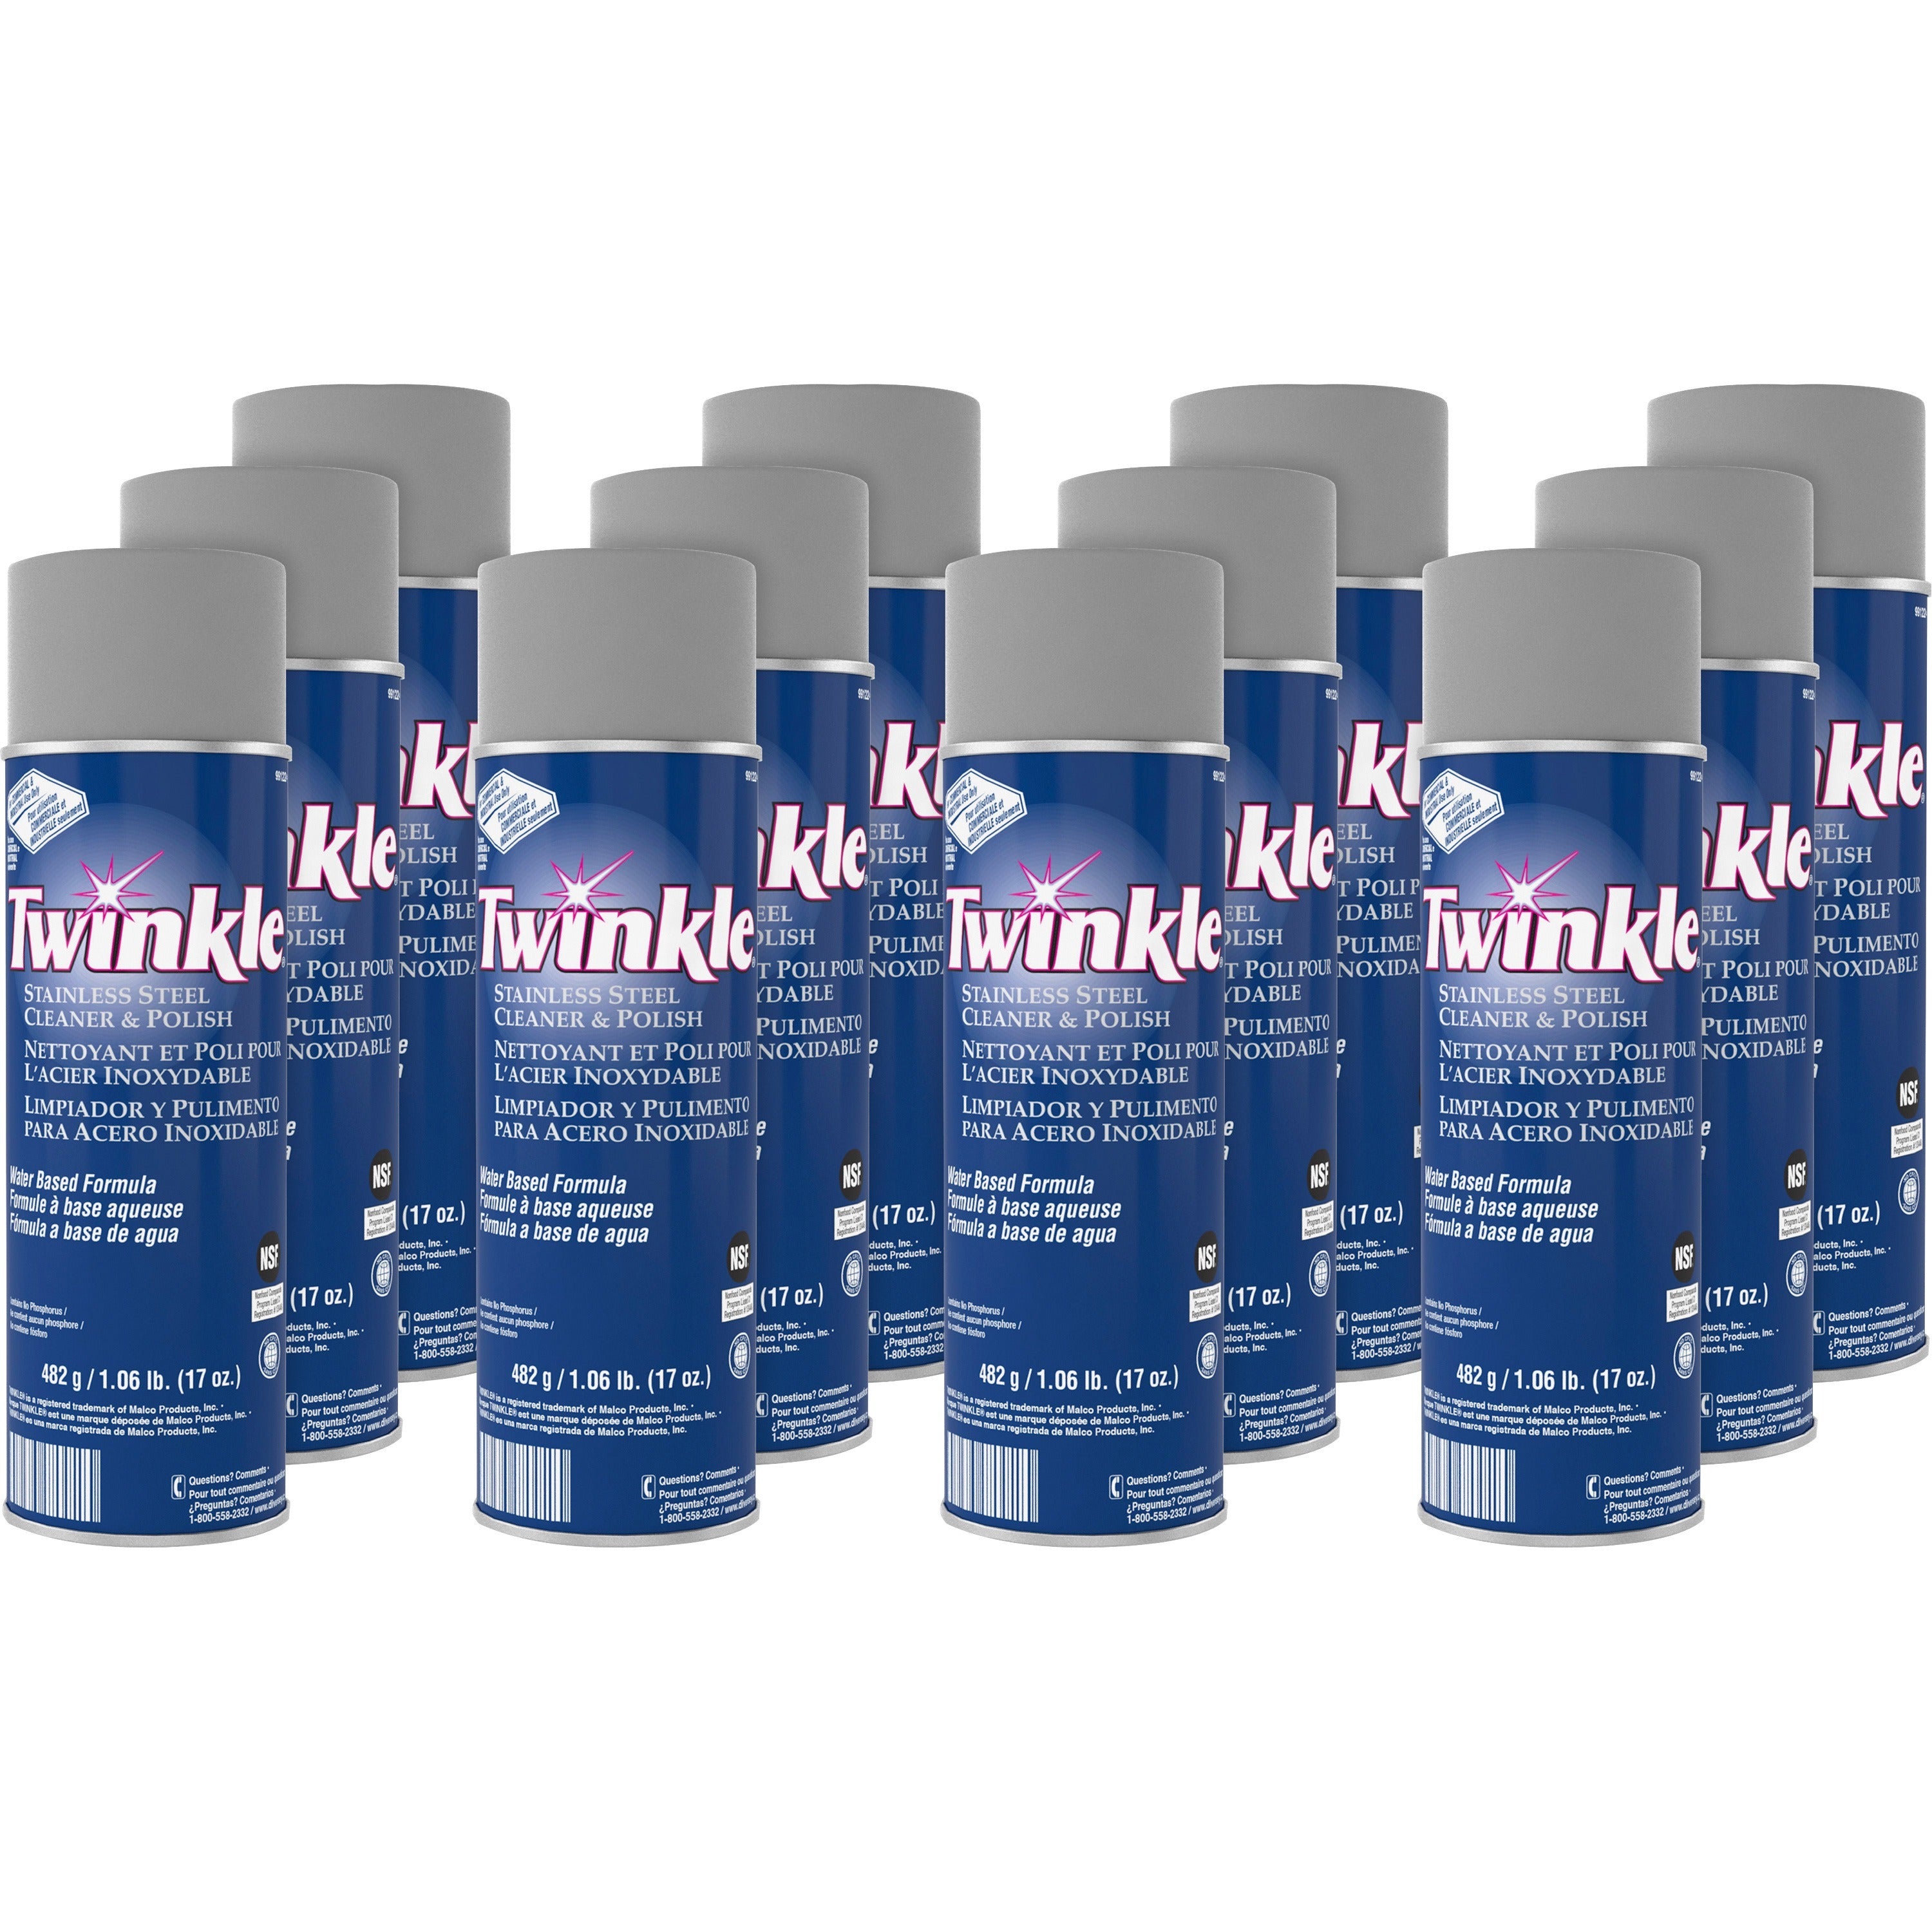 twinkle-stainless-steel-cleaner-polish-ready-to-use-17-oz-106-lb-characteristic-scent-12-carton-film-free-residue-free-water-based-lemon-scent-cfc-free-white_dvo991224ct - 1